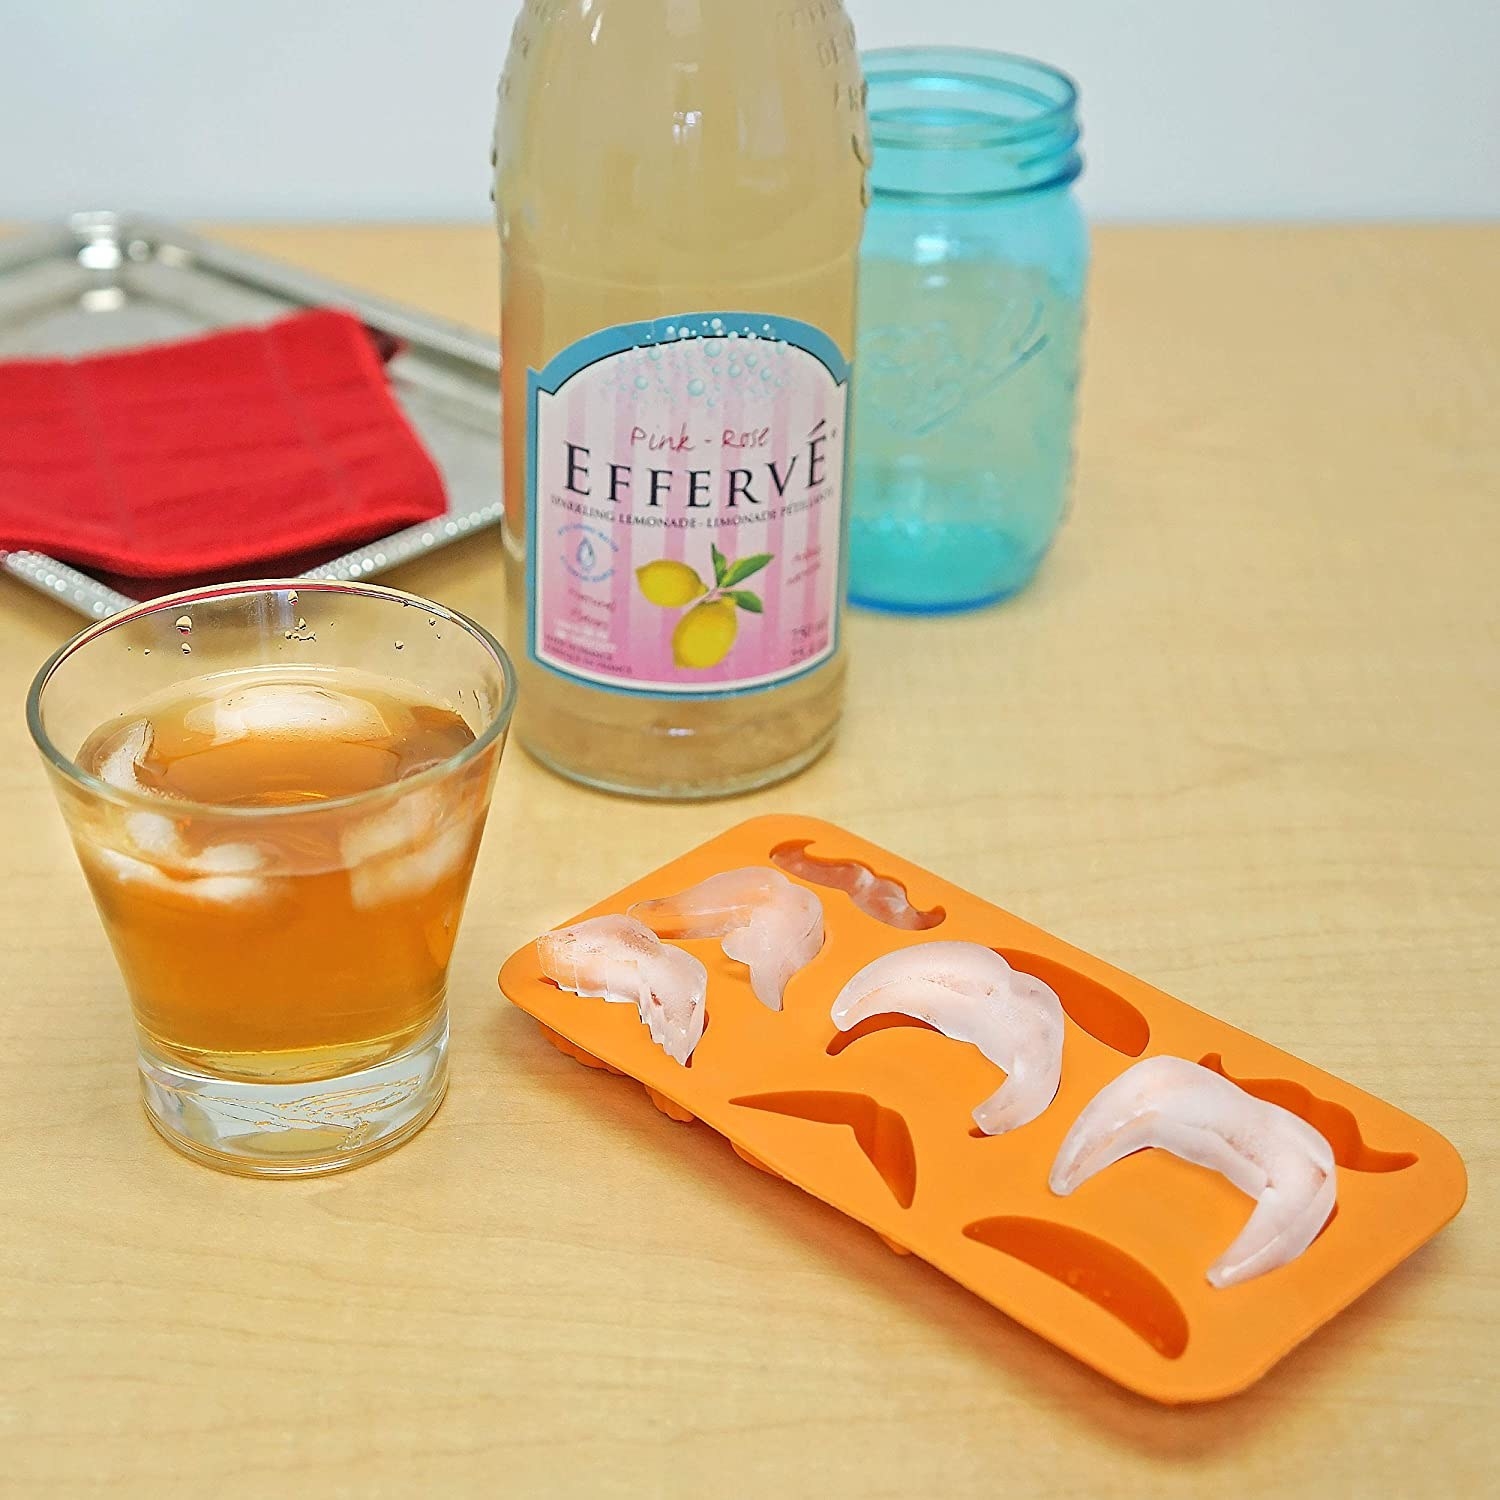 The ice cube tray filled with moustache-shaped cubes